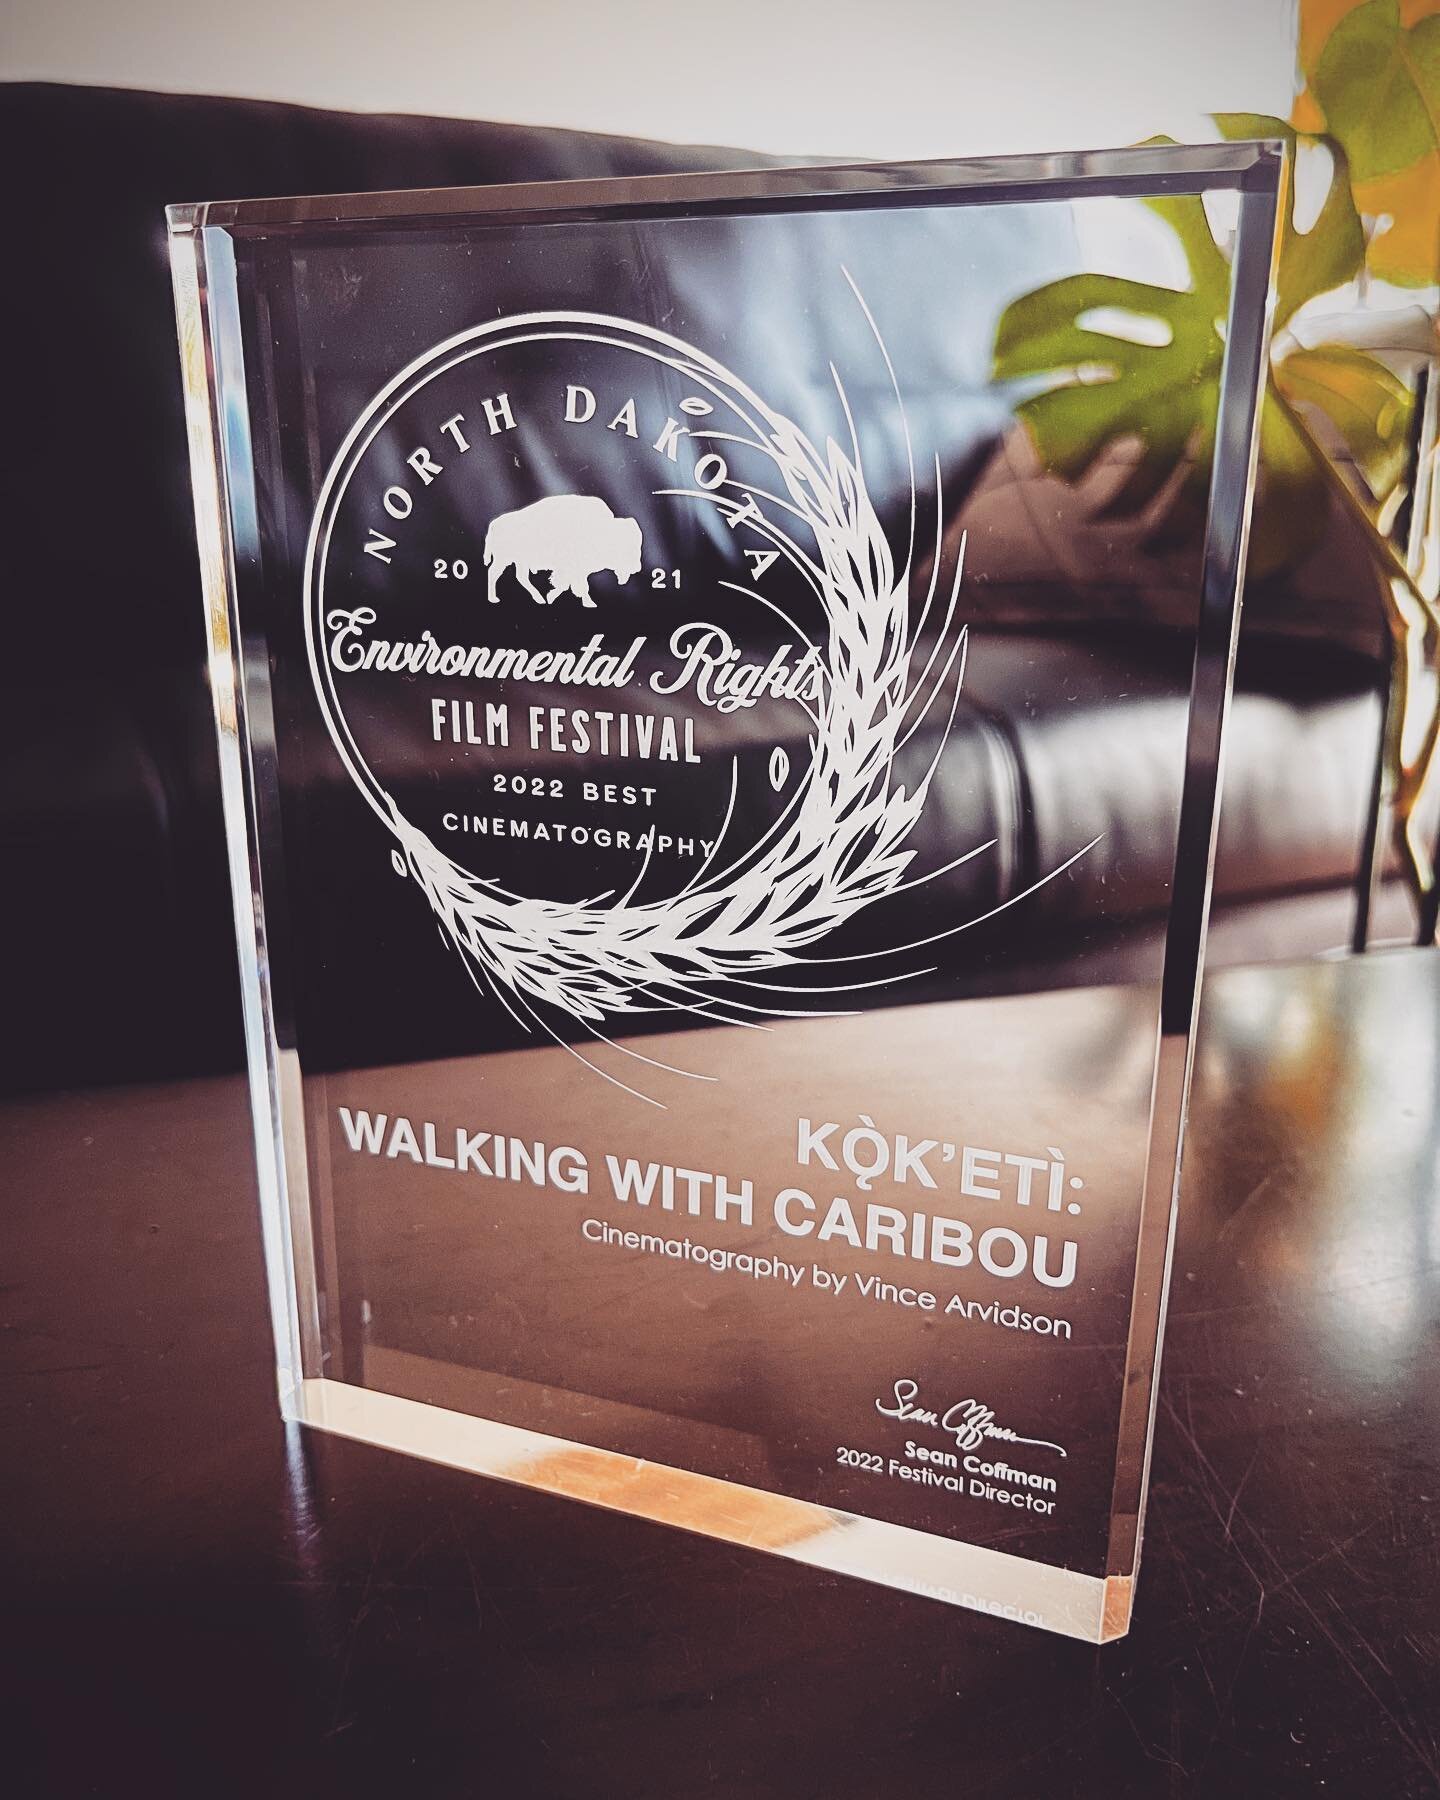 Congratulations to cinematographer Vince Arvidson for his exceptional efforts on KǪ̀K&rsquo;ET&Igrave;: Walking with Caribou and much gratitude to Sean Coffman and the whole team at the North Dakota Environmental Rights Film Festival. Rob and Taylor,